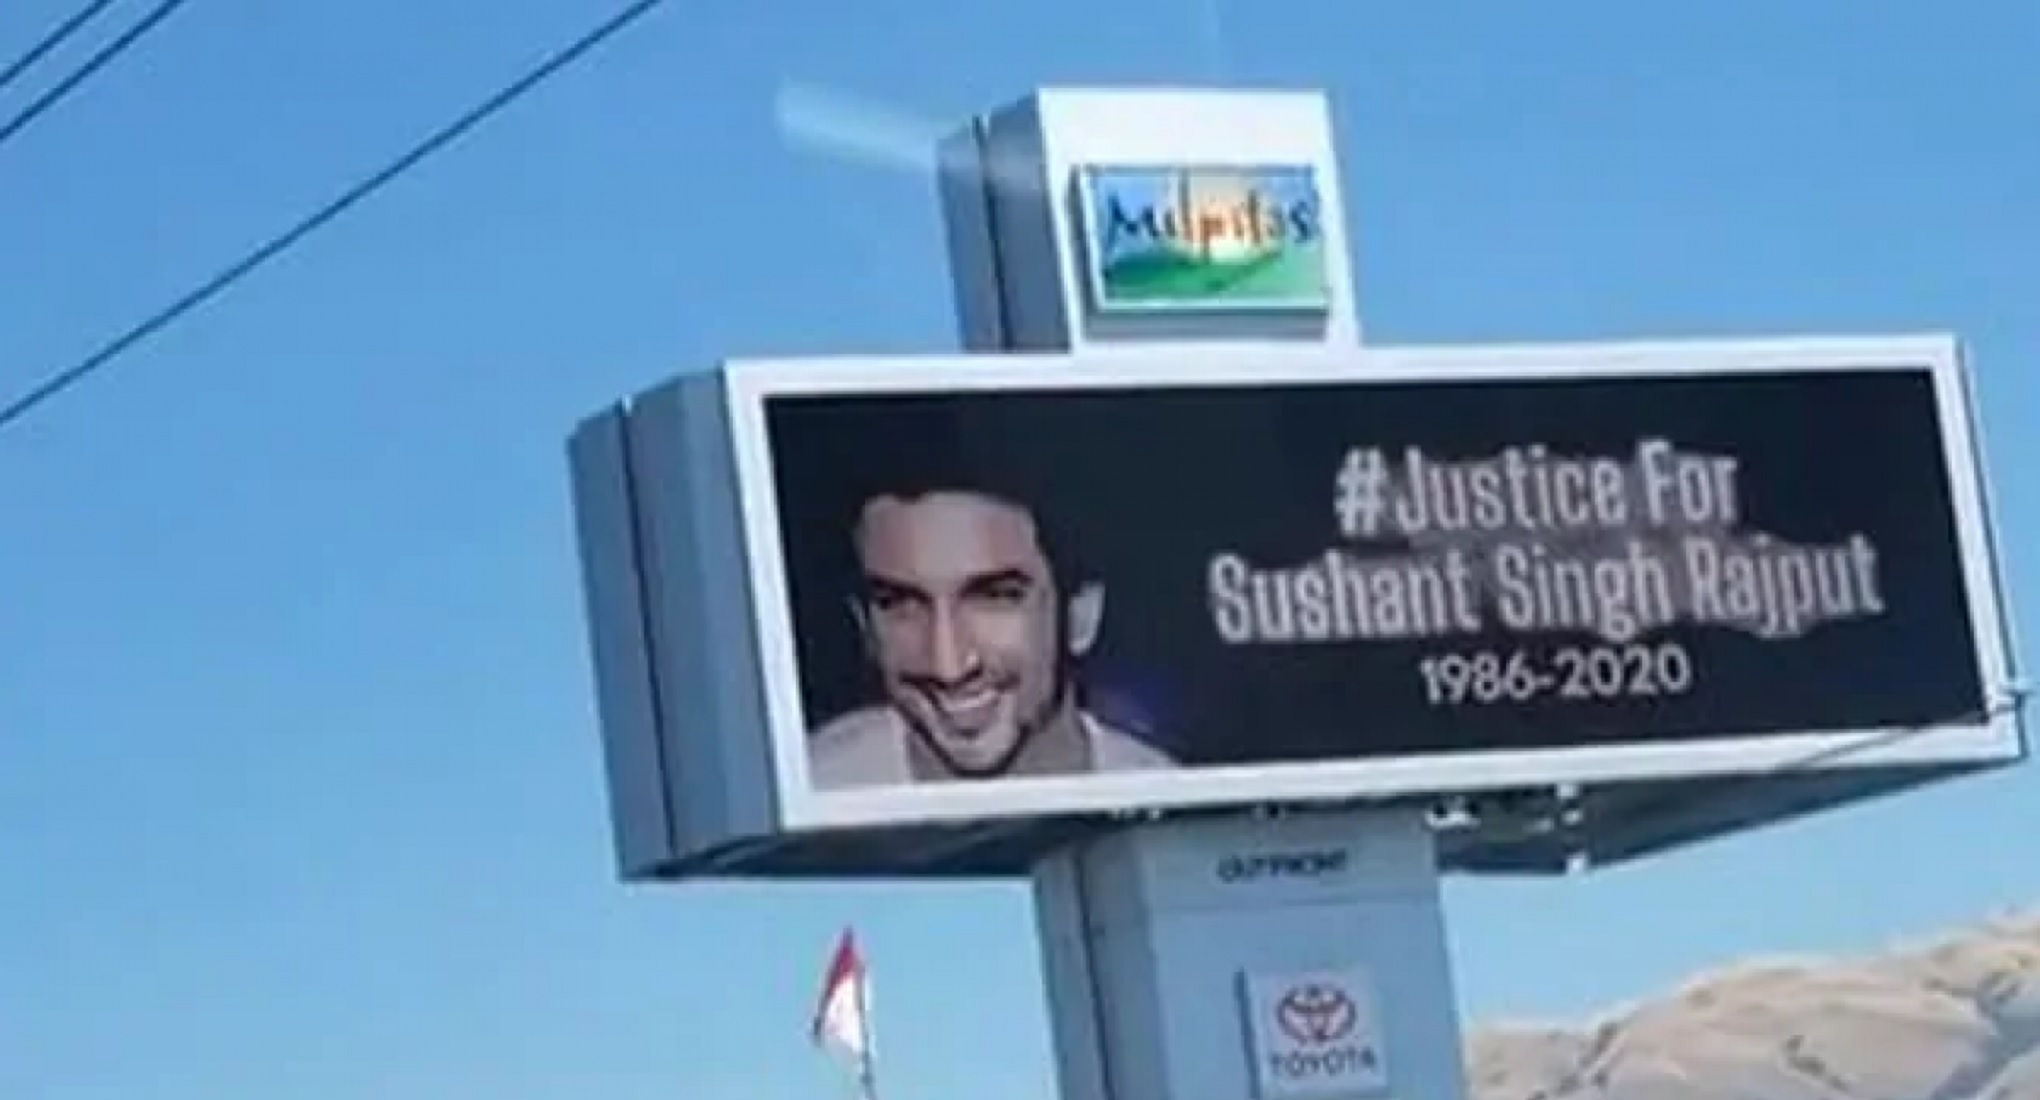 “Justice For Sushant Singh Rajput” – Billboard Stood-Up In California, United States